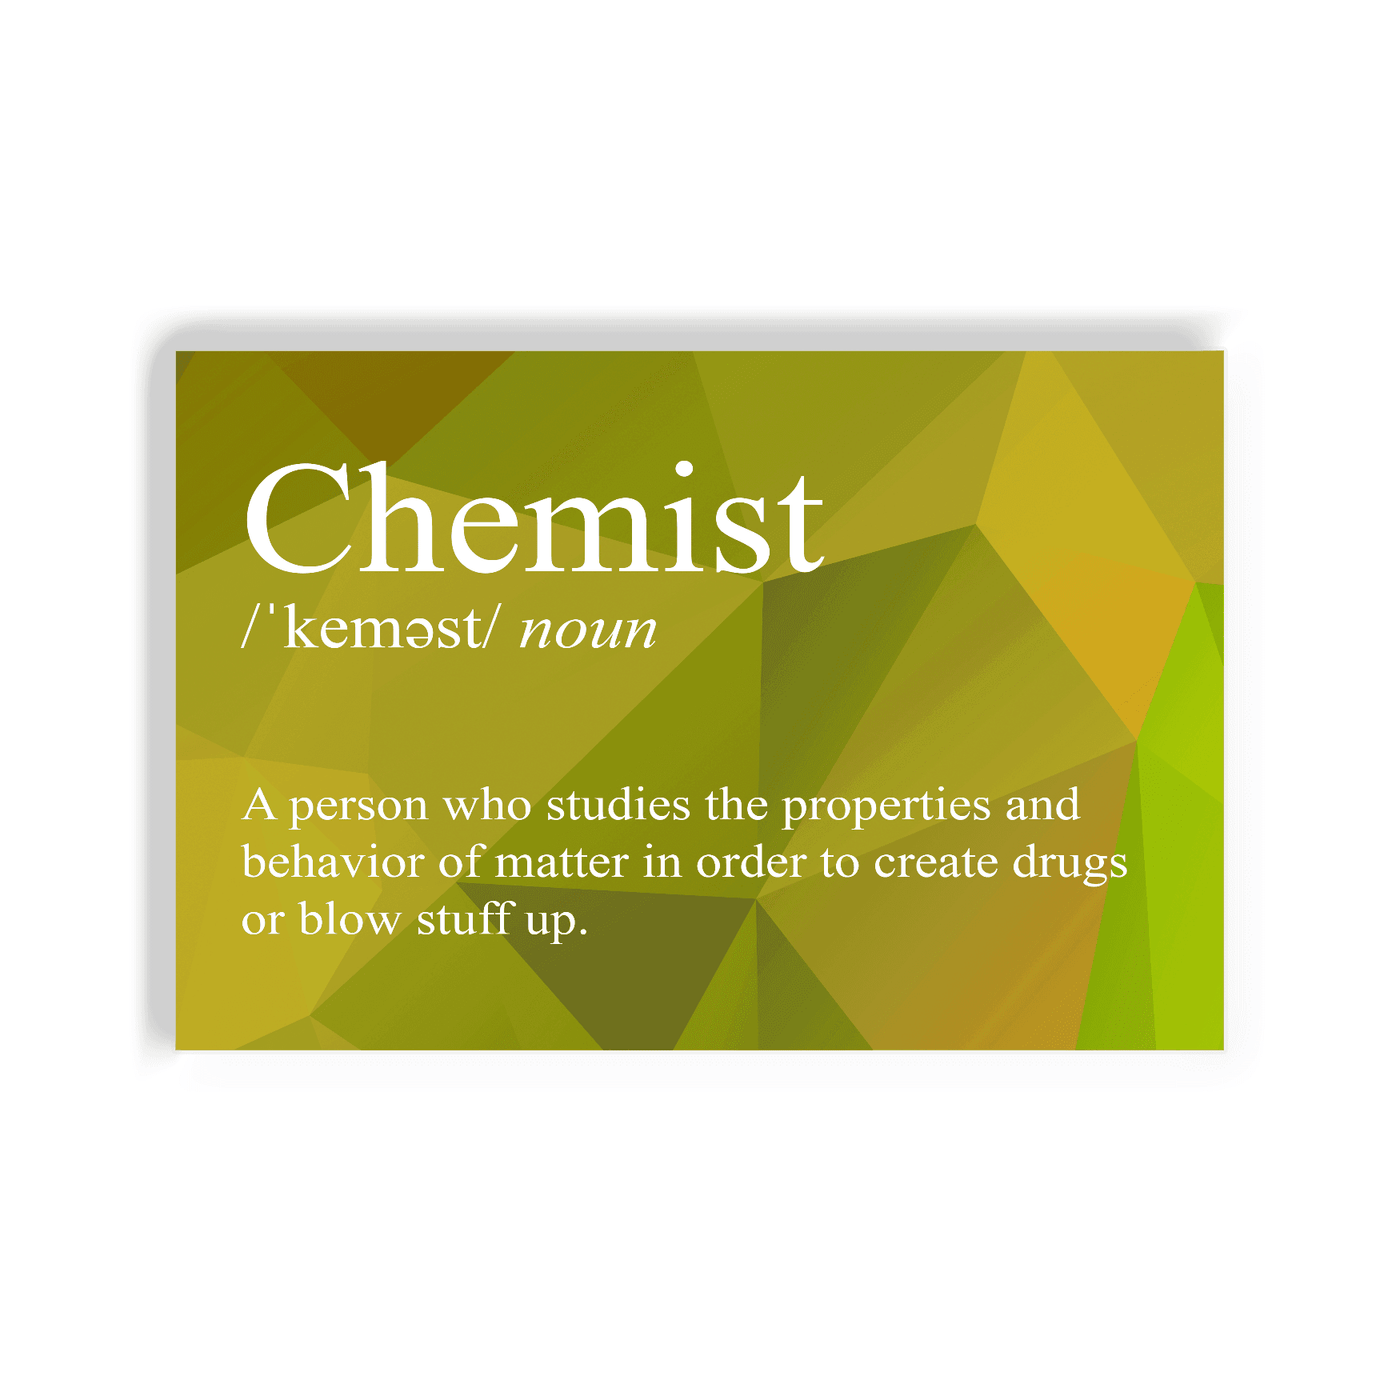 2x3 colorful magnet with image of triangles with text snarkily defining a chemist